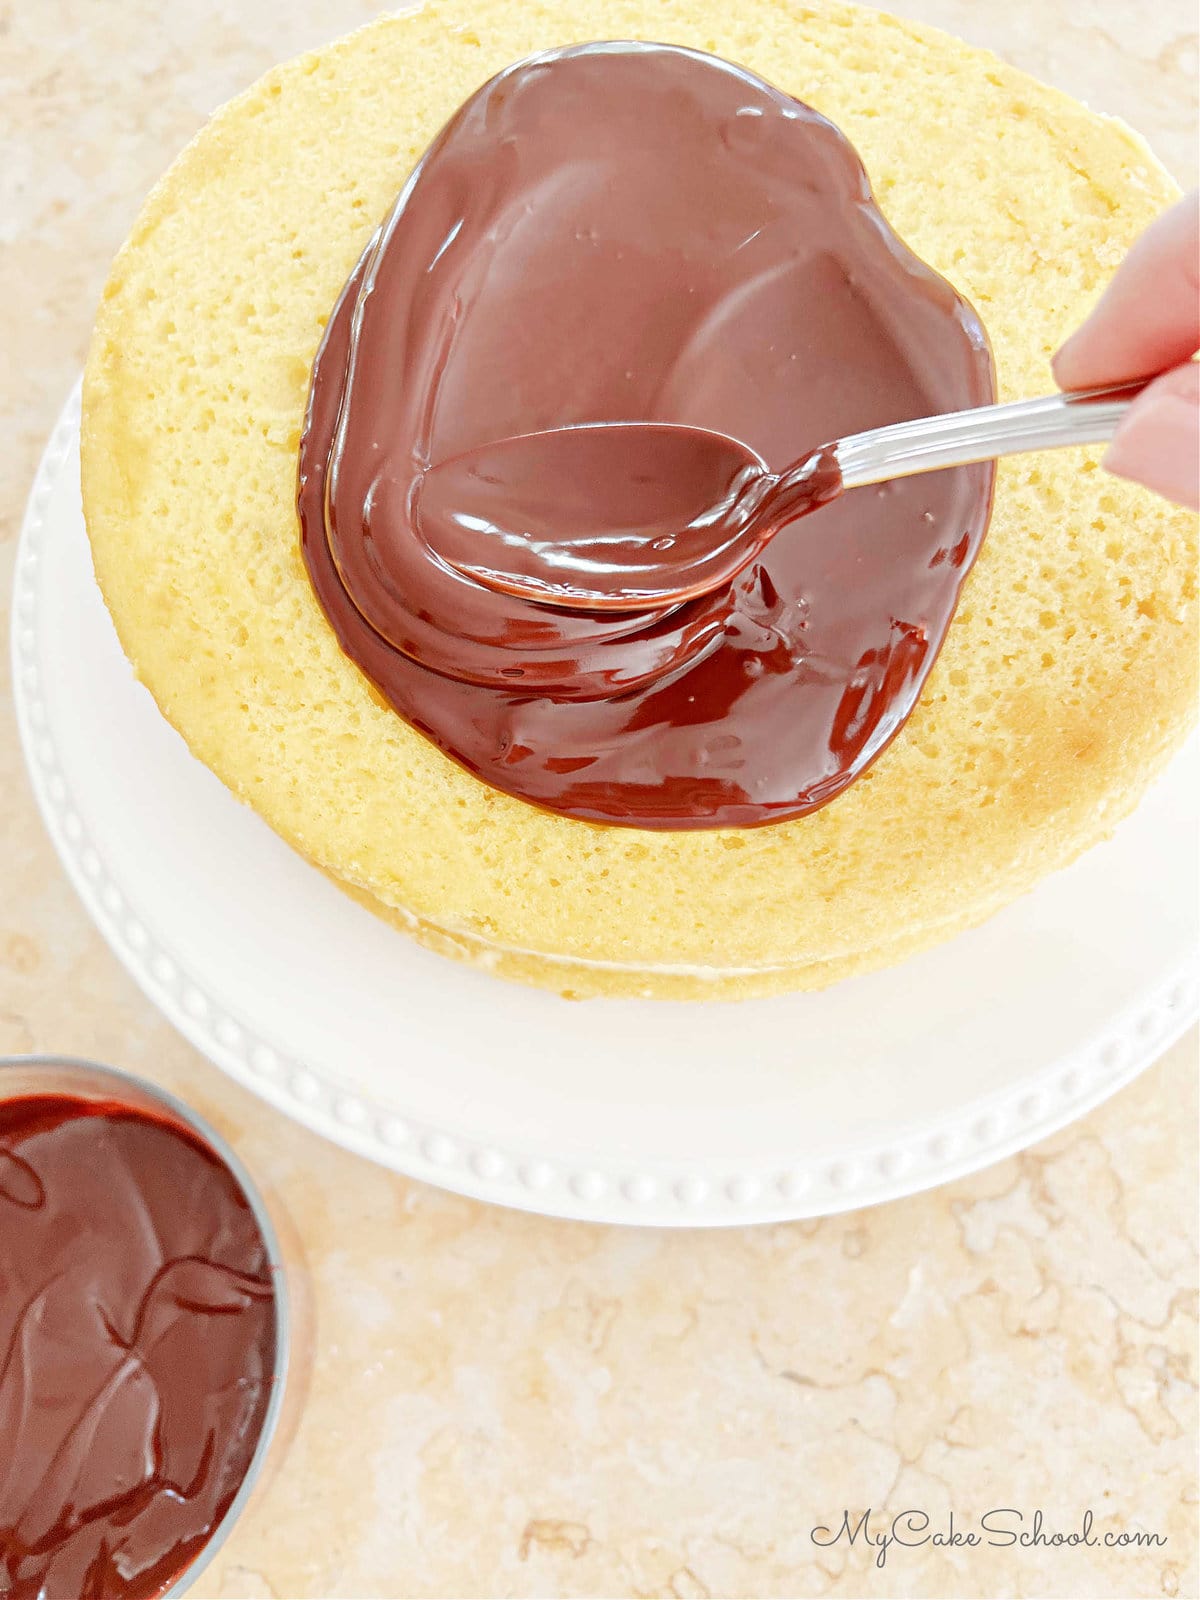 Applying ganache to the top of the cake